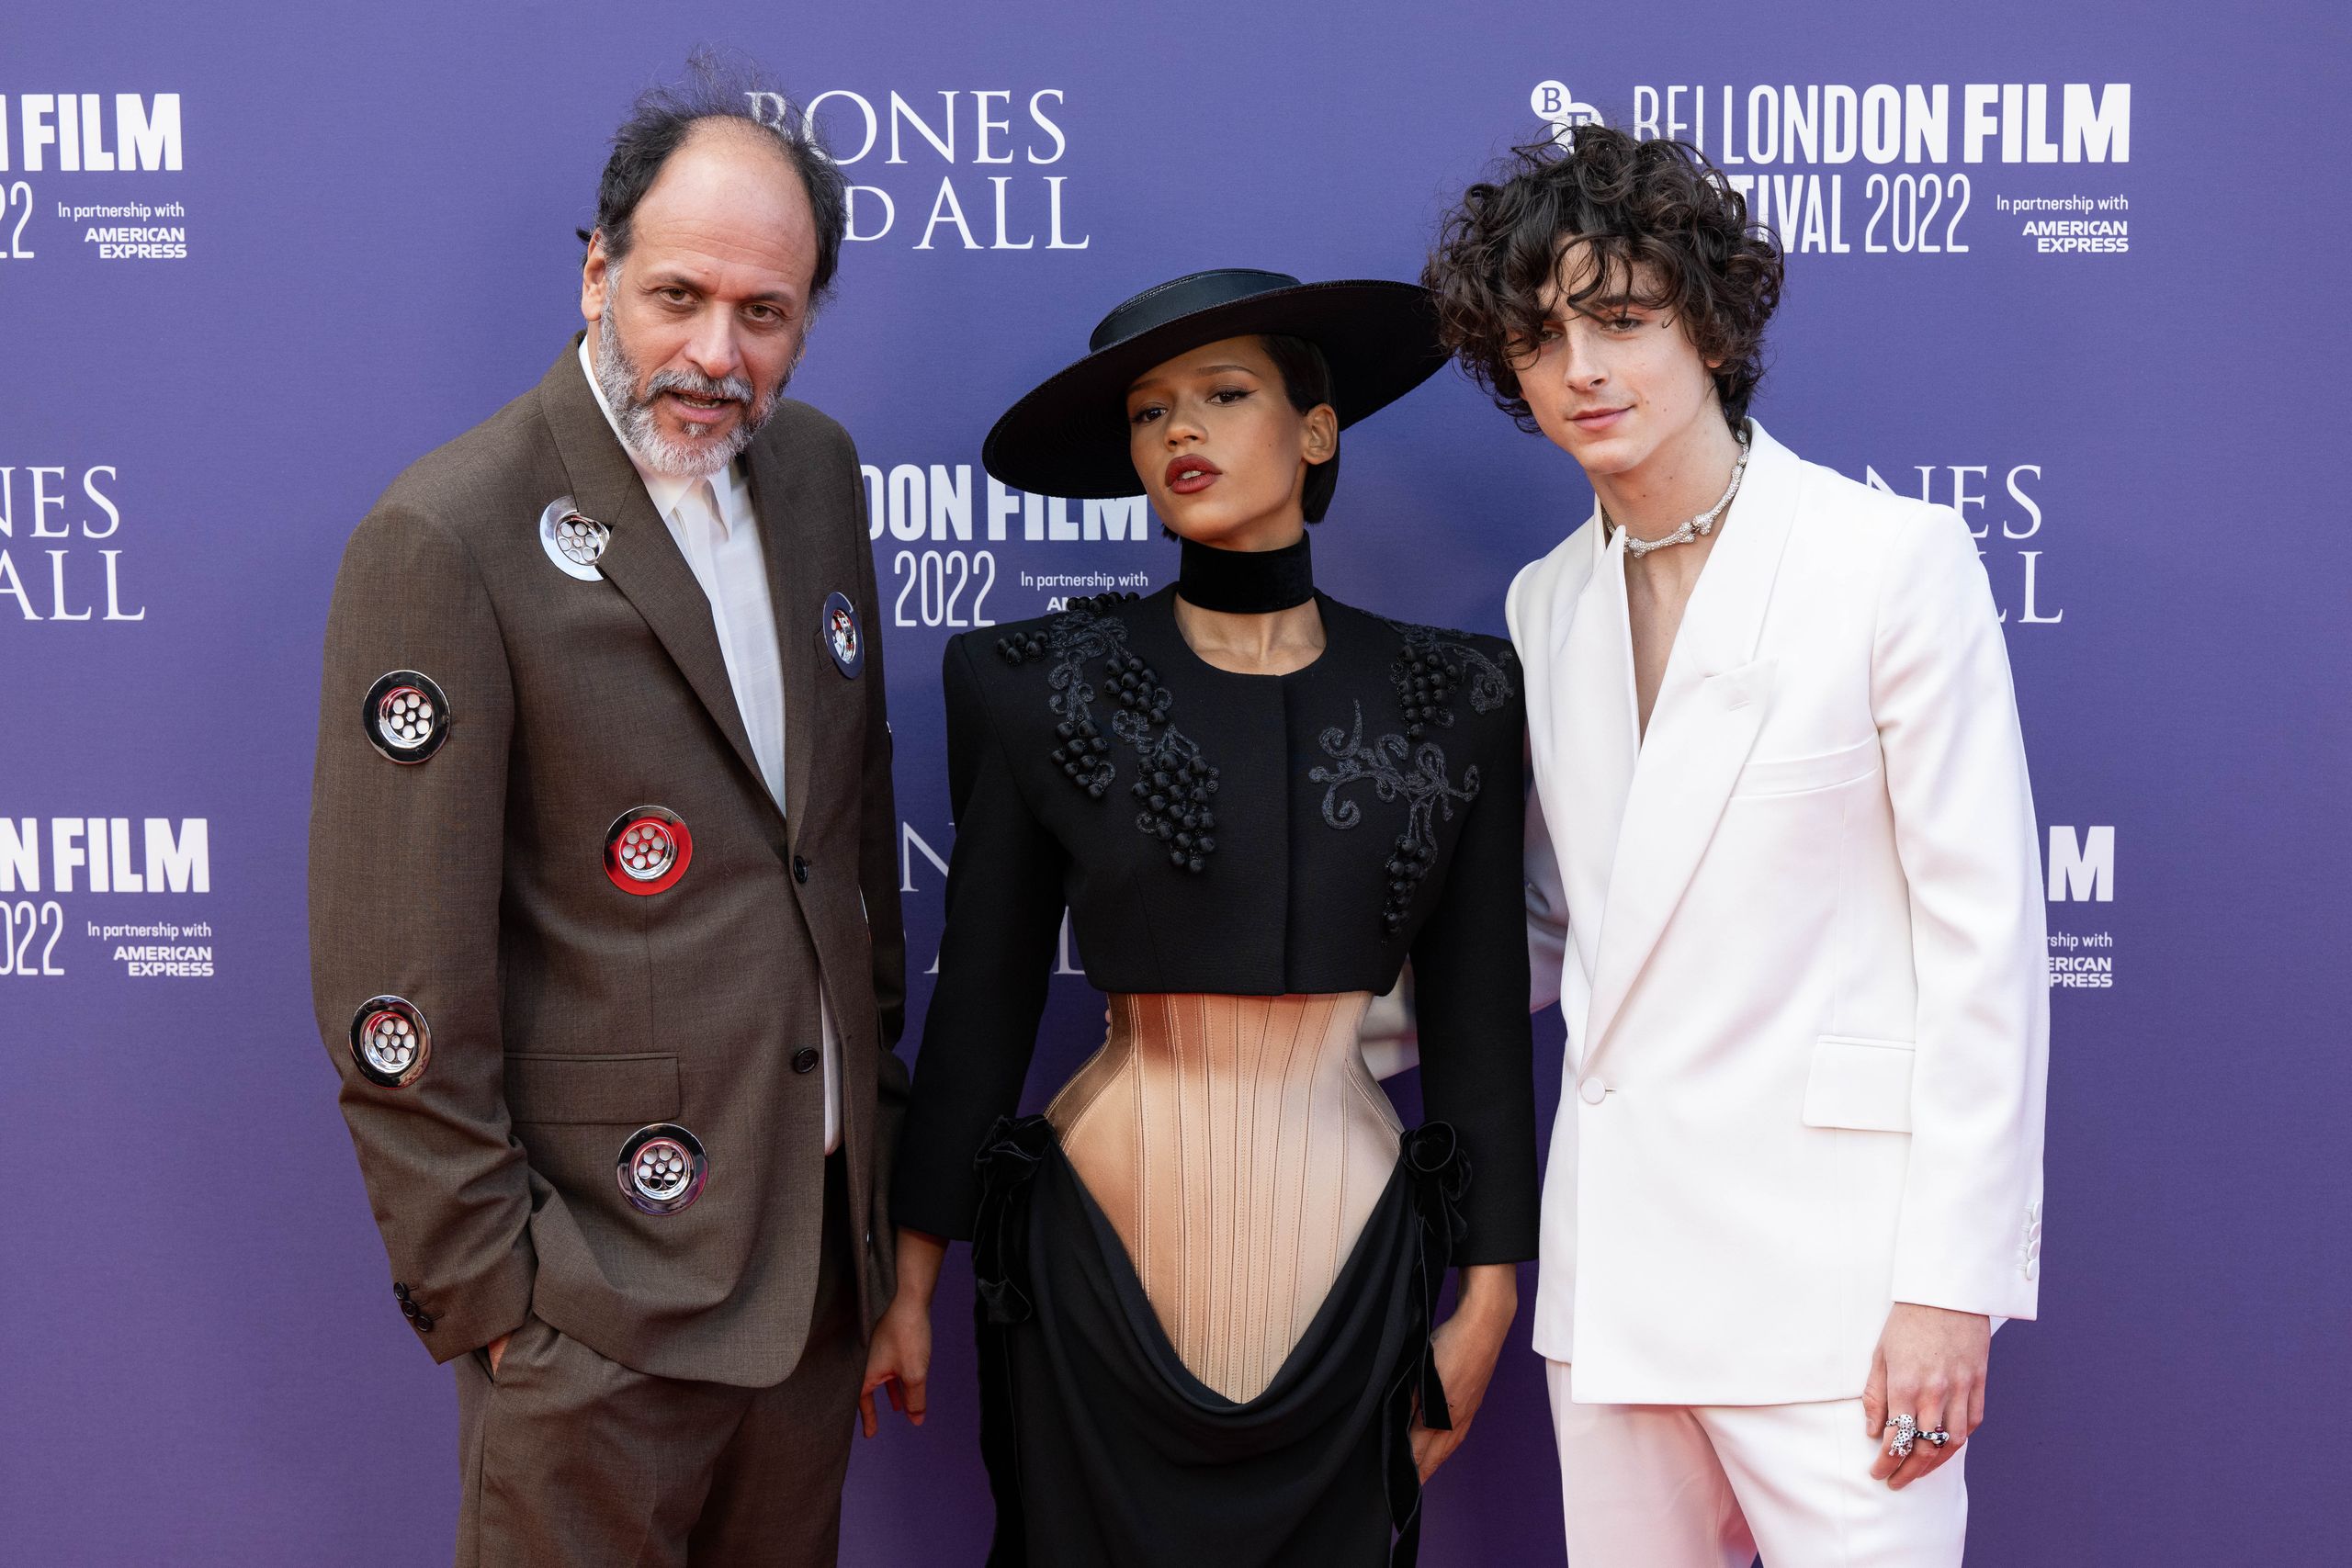 bones and all cast: luca guadagnino taylor russell e timothée chalamet